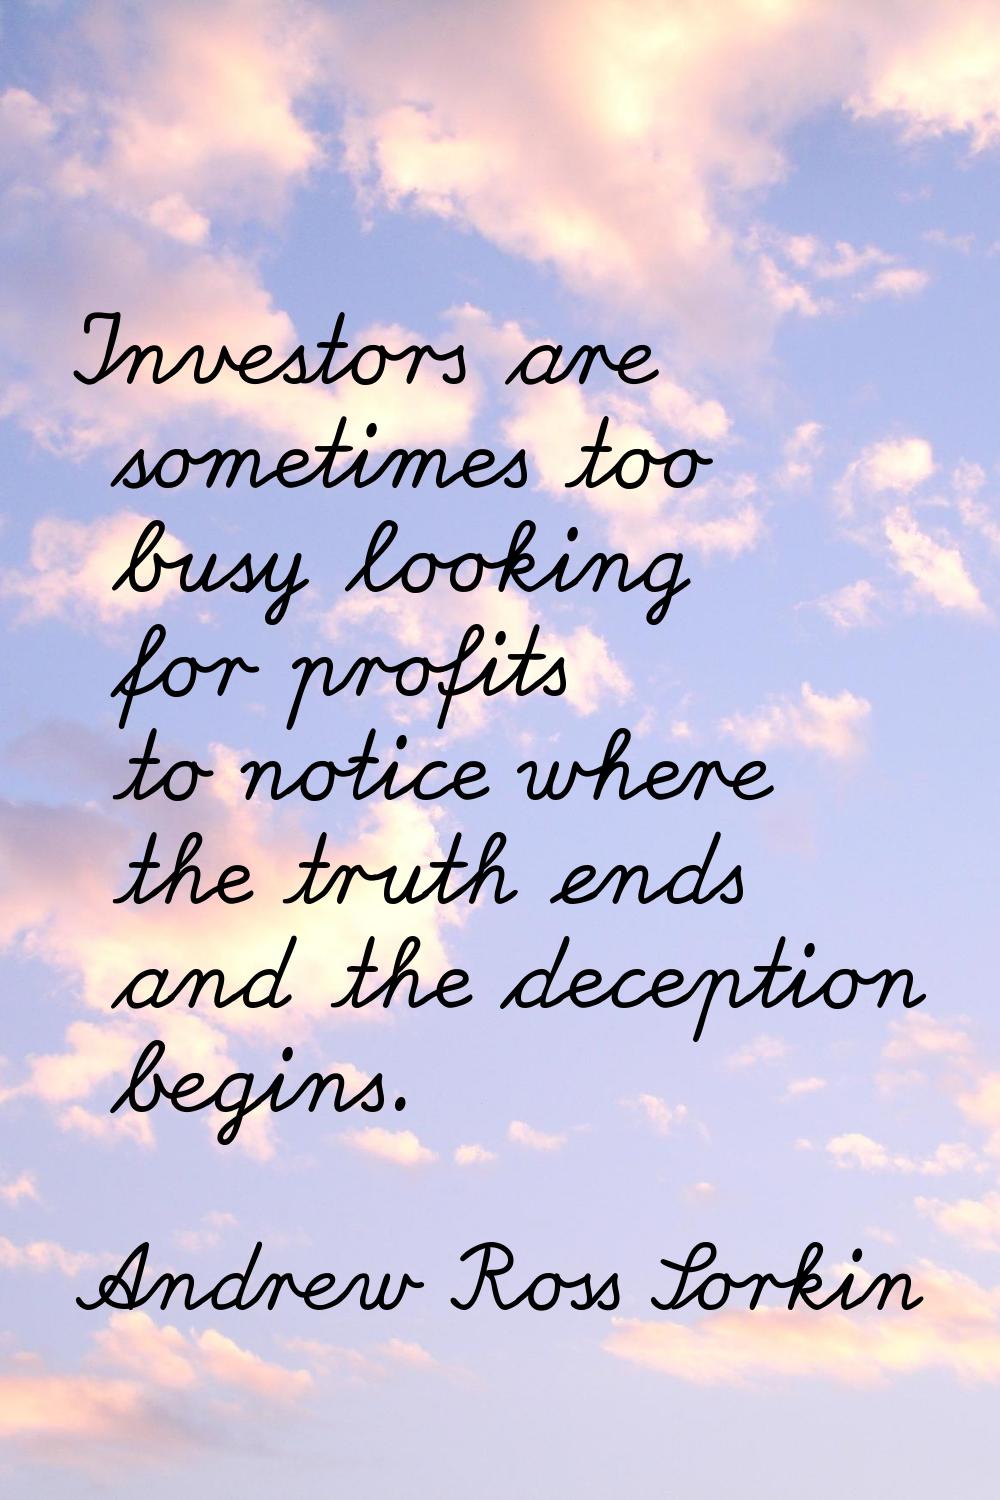 Investors are sometimes too busy looking for profits to notice where the truth ends and the decepti